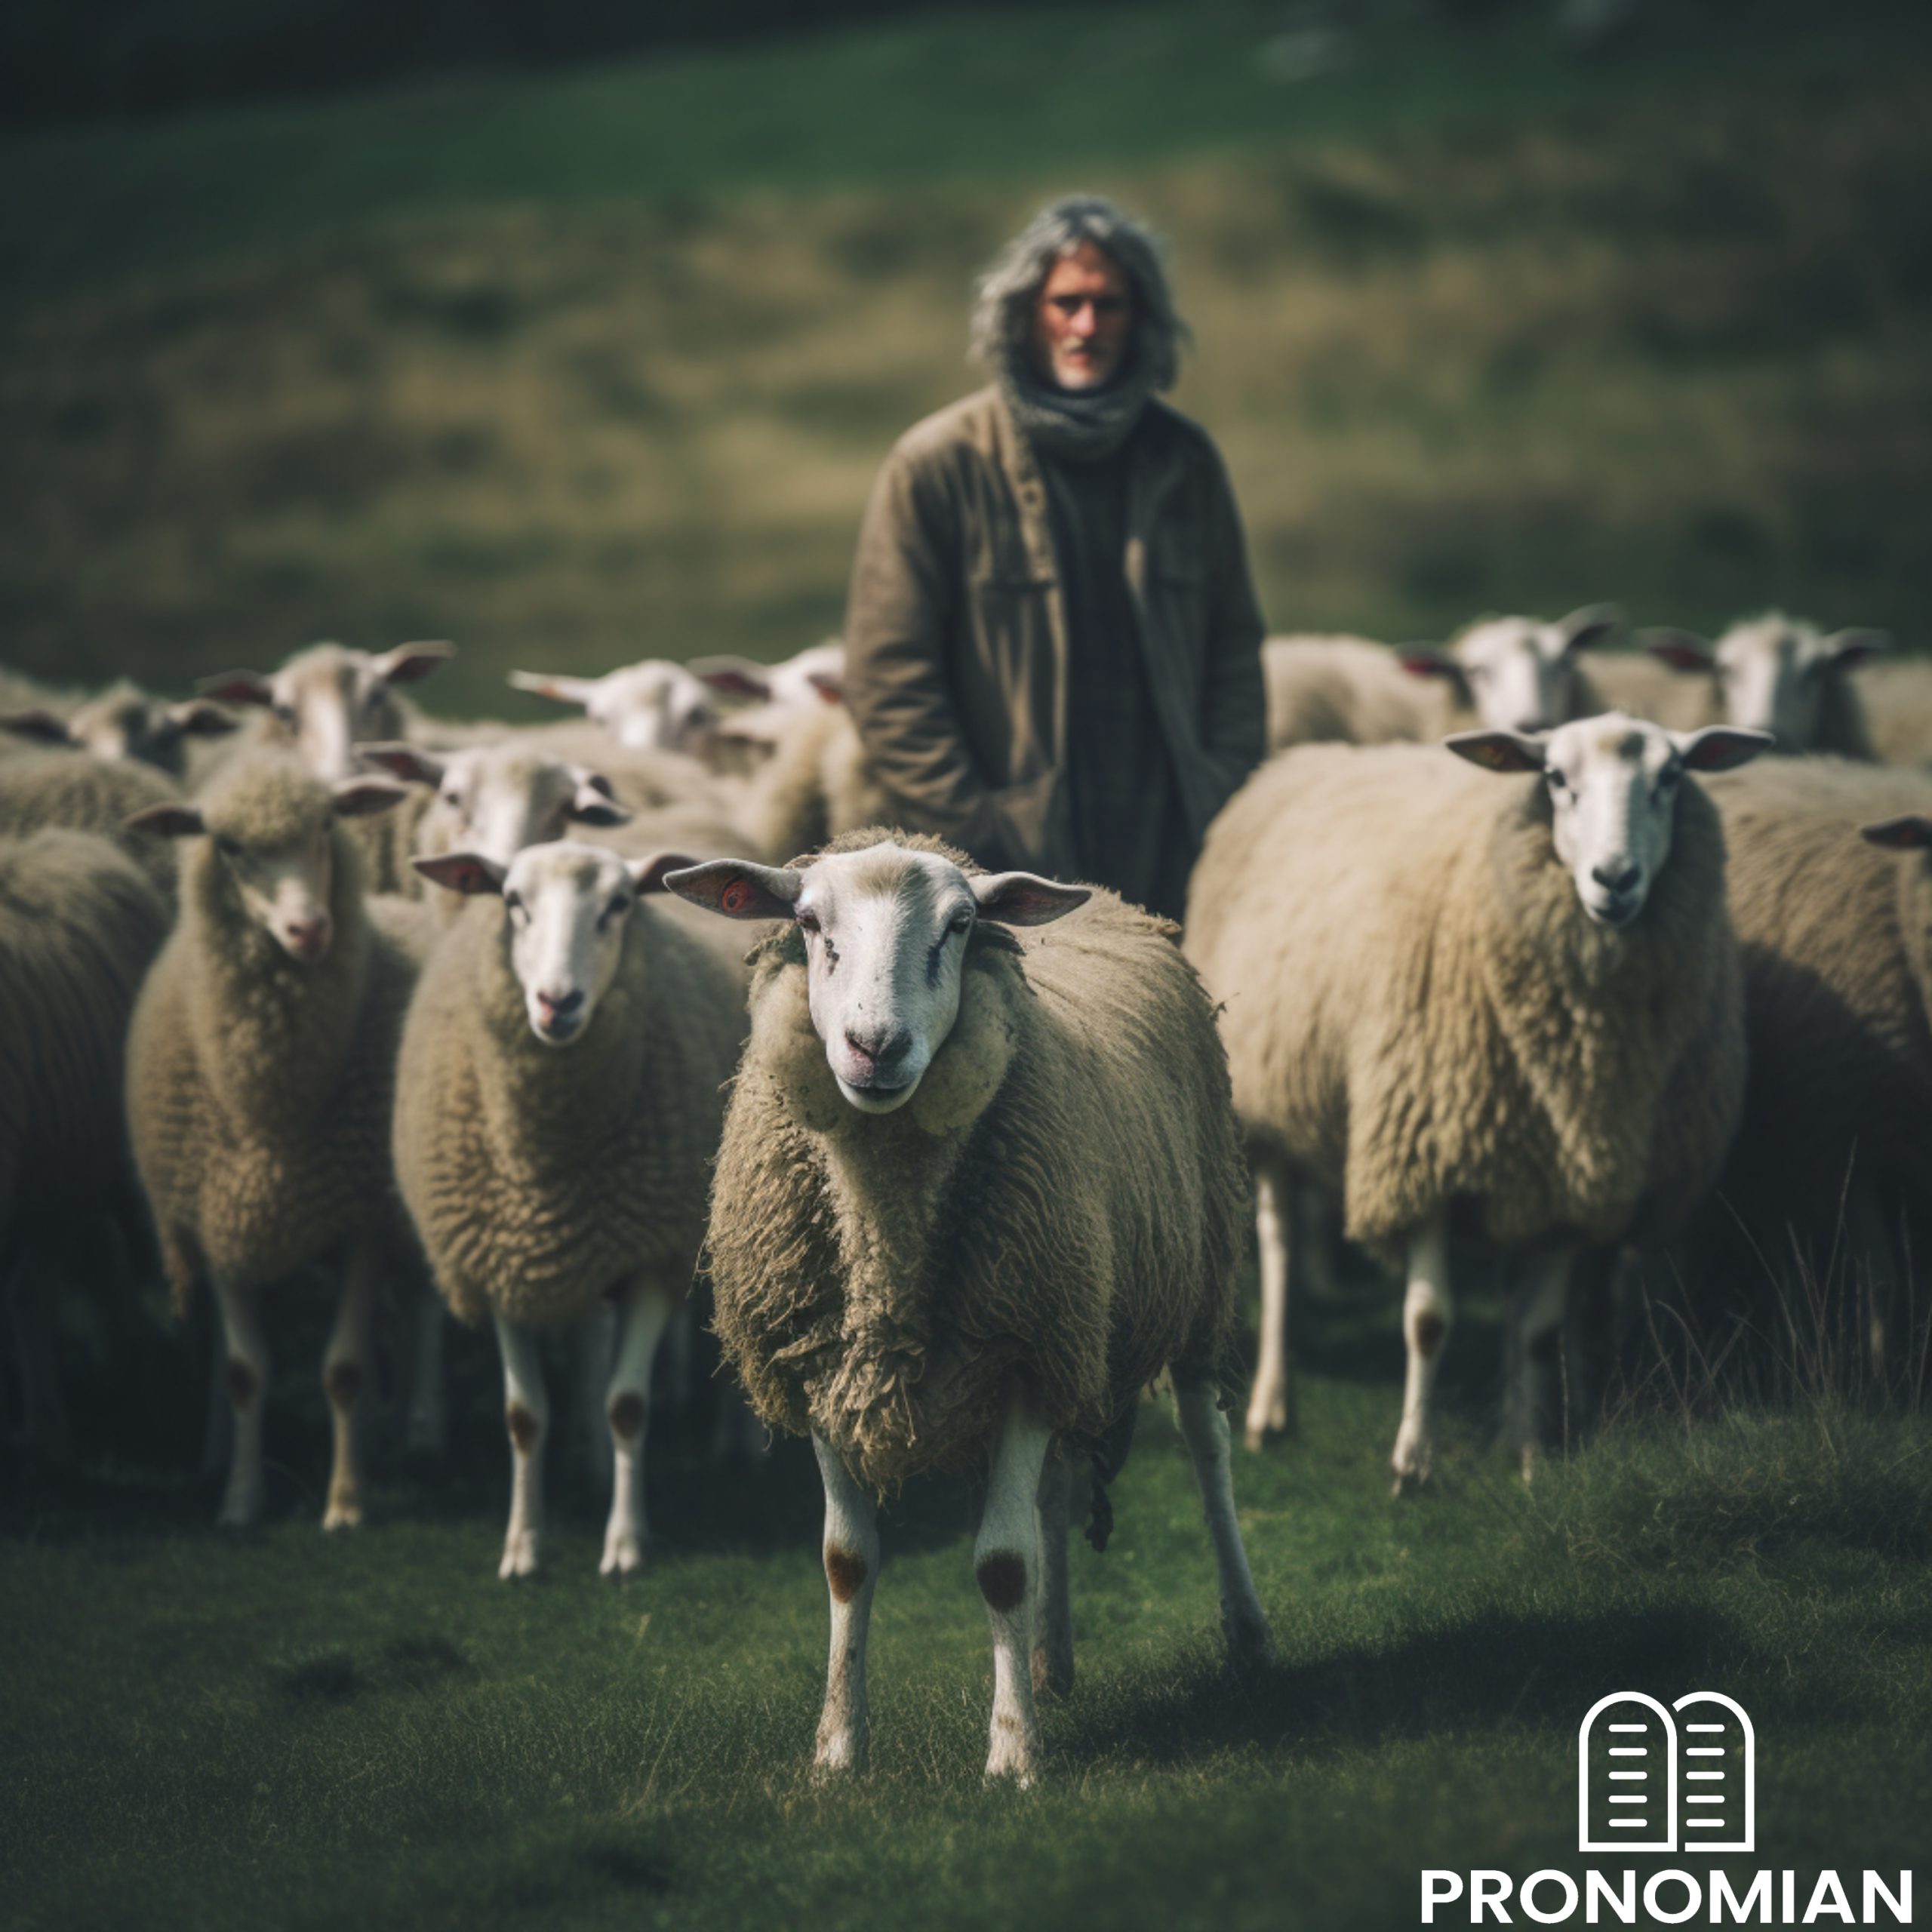 An image showing a flock of sheep peacefully grazing on a green meadow, with one sheep subtly different, revealing wolf eyes or slightly protruding claws, symbolizing a wolf in sheep's clothing. In the background, a watchful shepherd stands with a staff, representing vigilance and discernment against false teachings. no contrast, sharp focus, cinematic photography